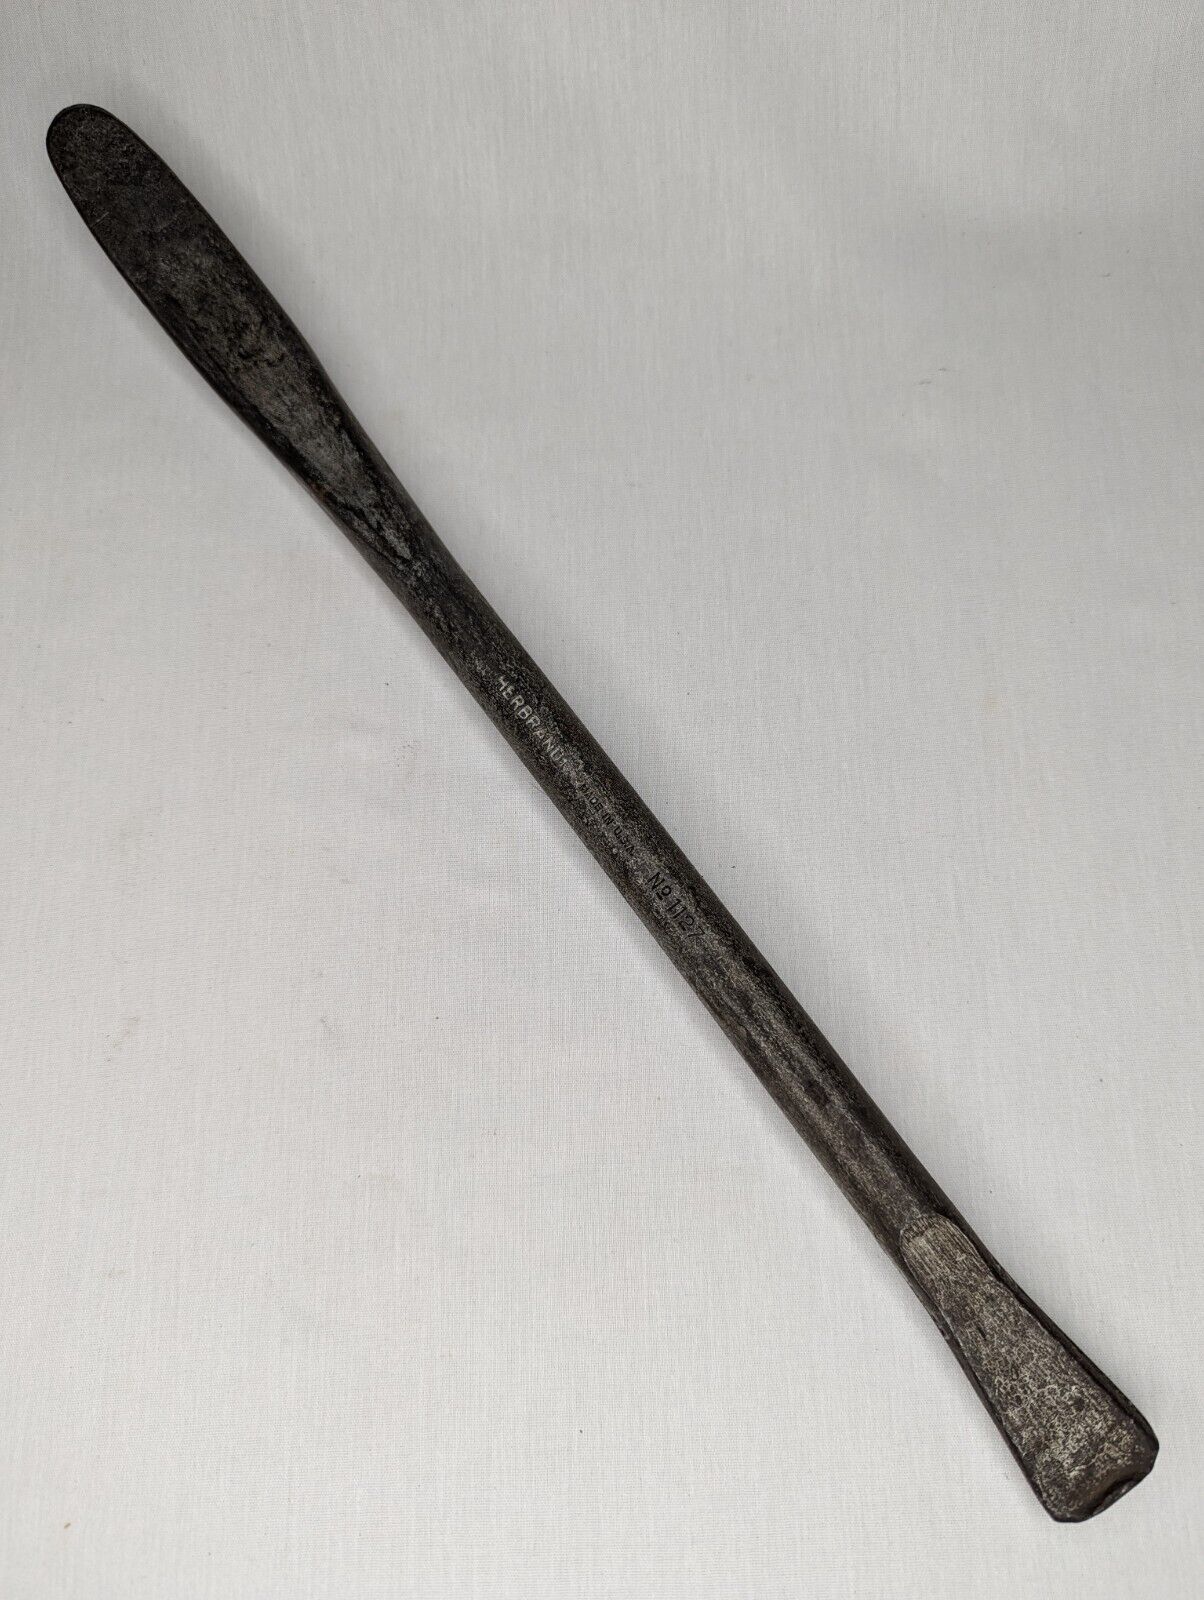 HERBRAND No. 1127 Tire Iron Tool Made In USA MODEL T